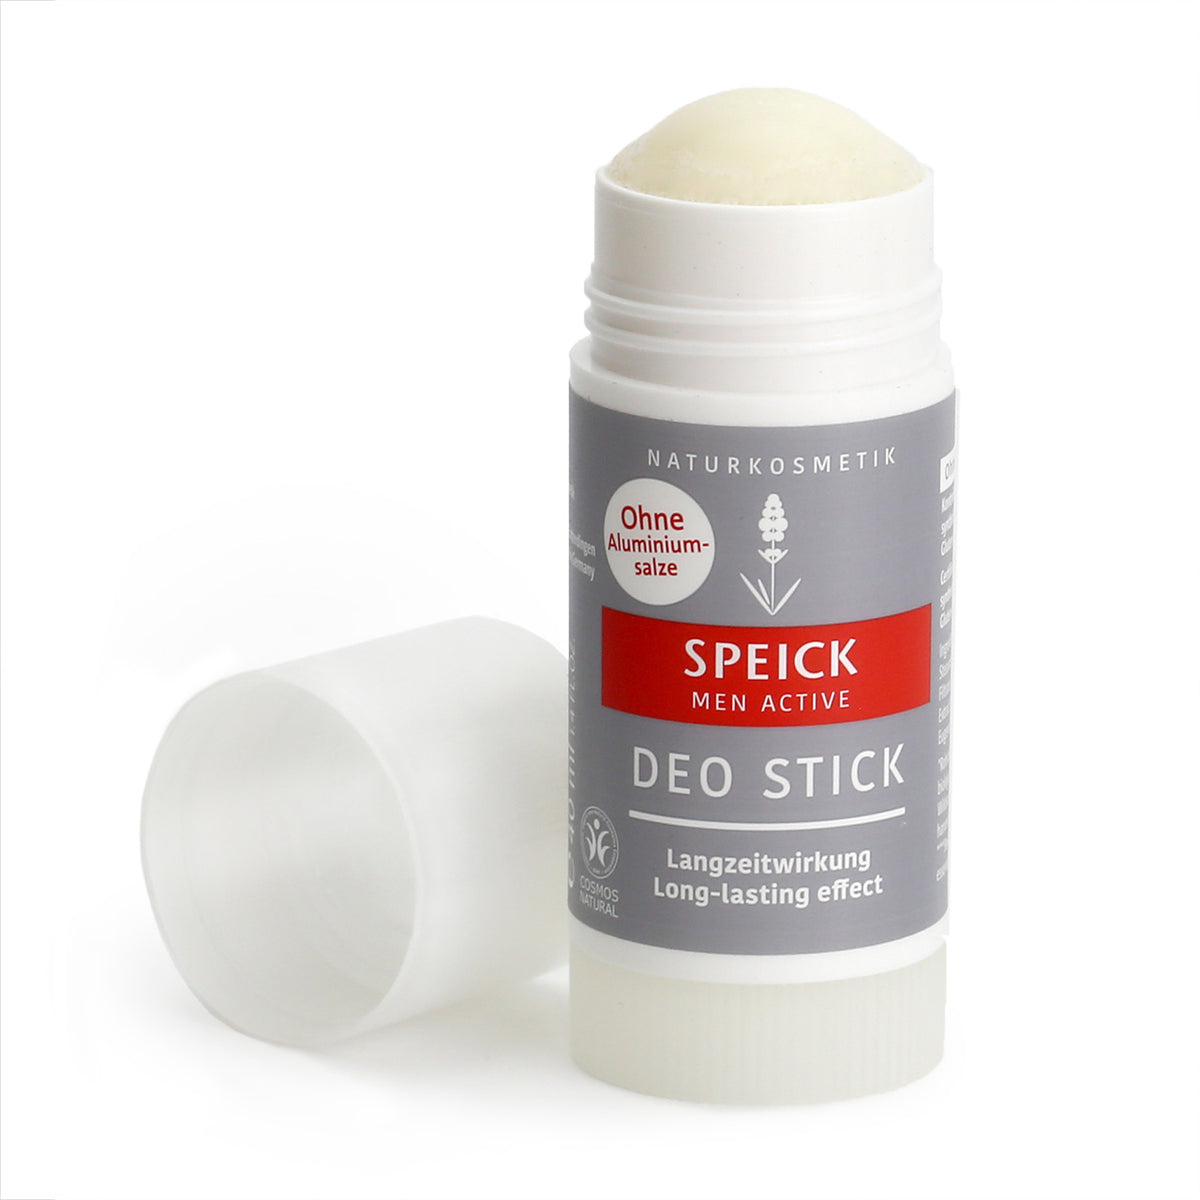 Speick Men Active deo stick with the lid removed to show the sphere shaped deodorant stick